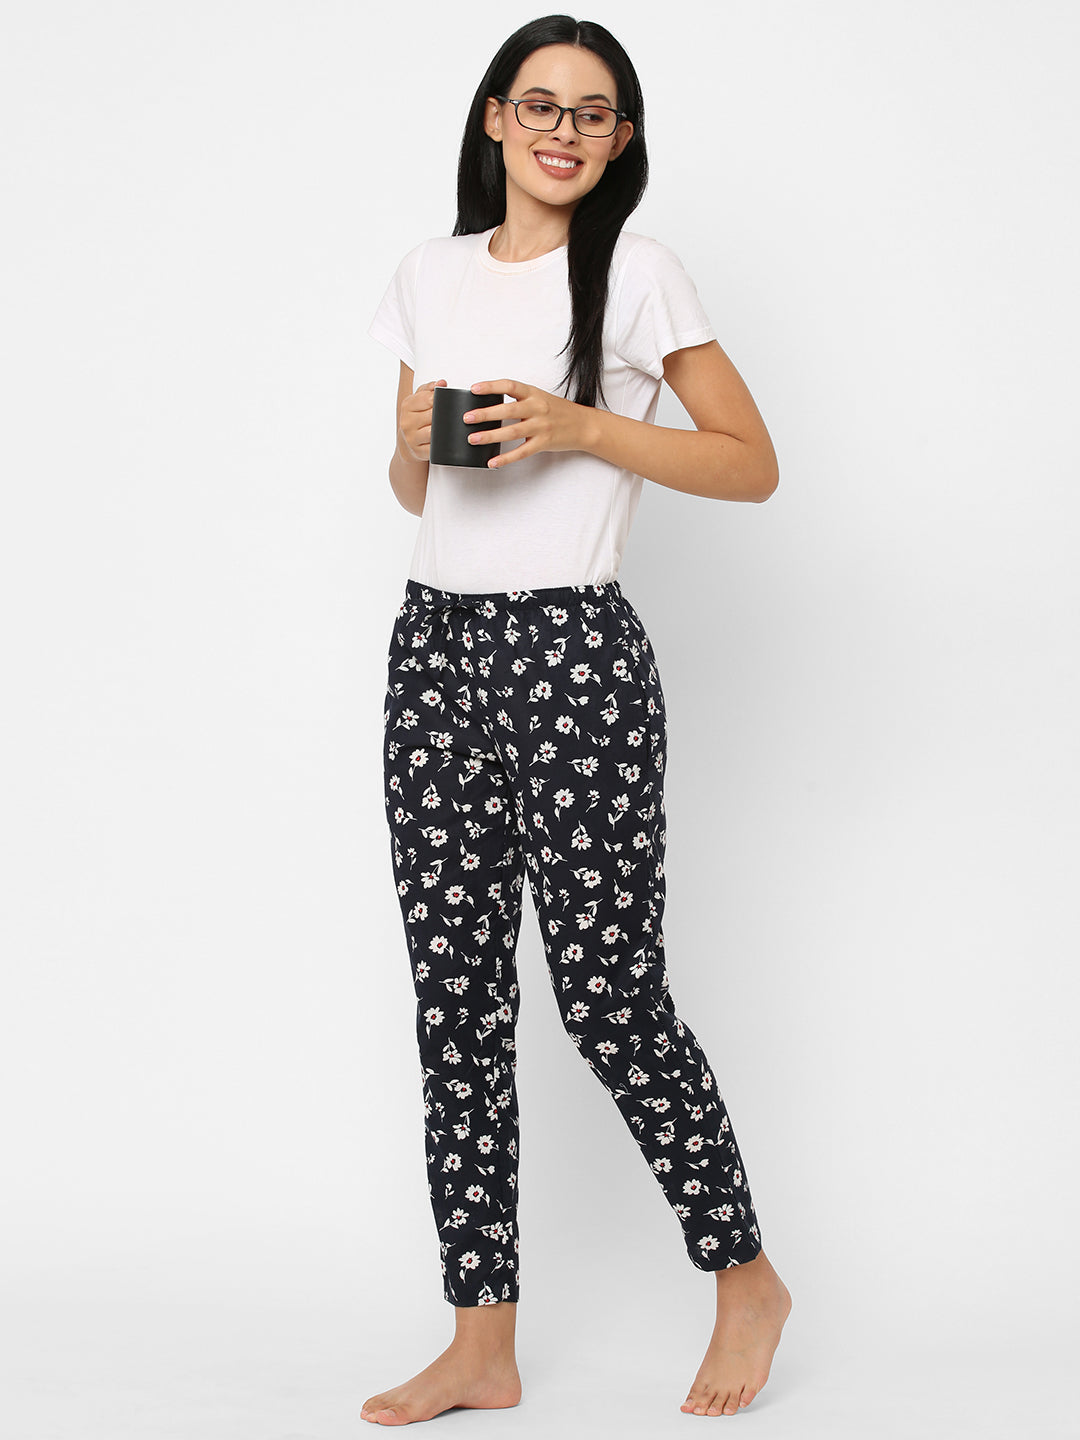 Women's Floral Print, Black, Cotton, Regular Fit, Elasticated, Waistband, Pyjama  With Side Pockets